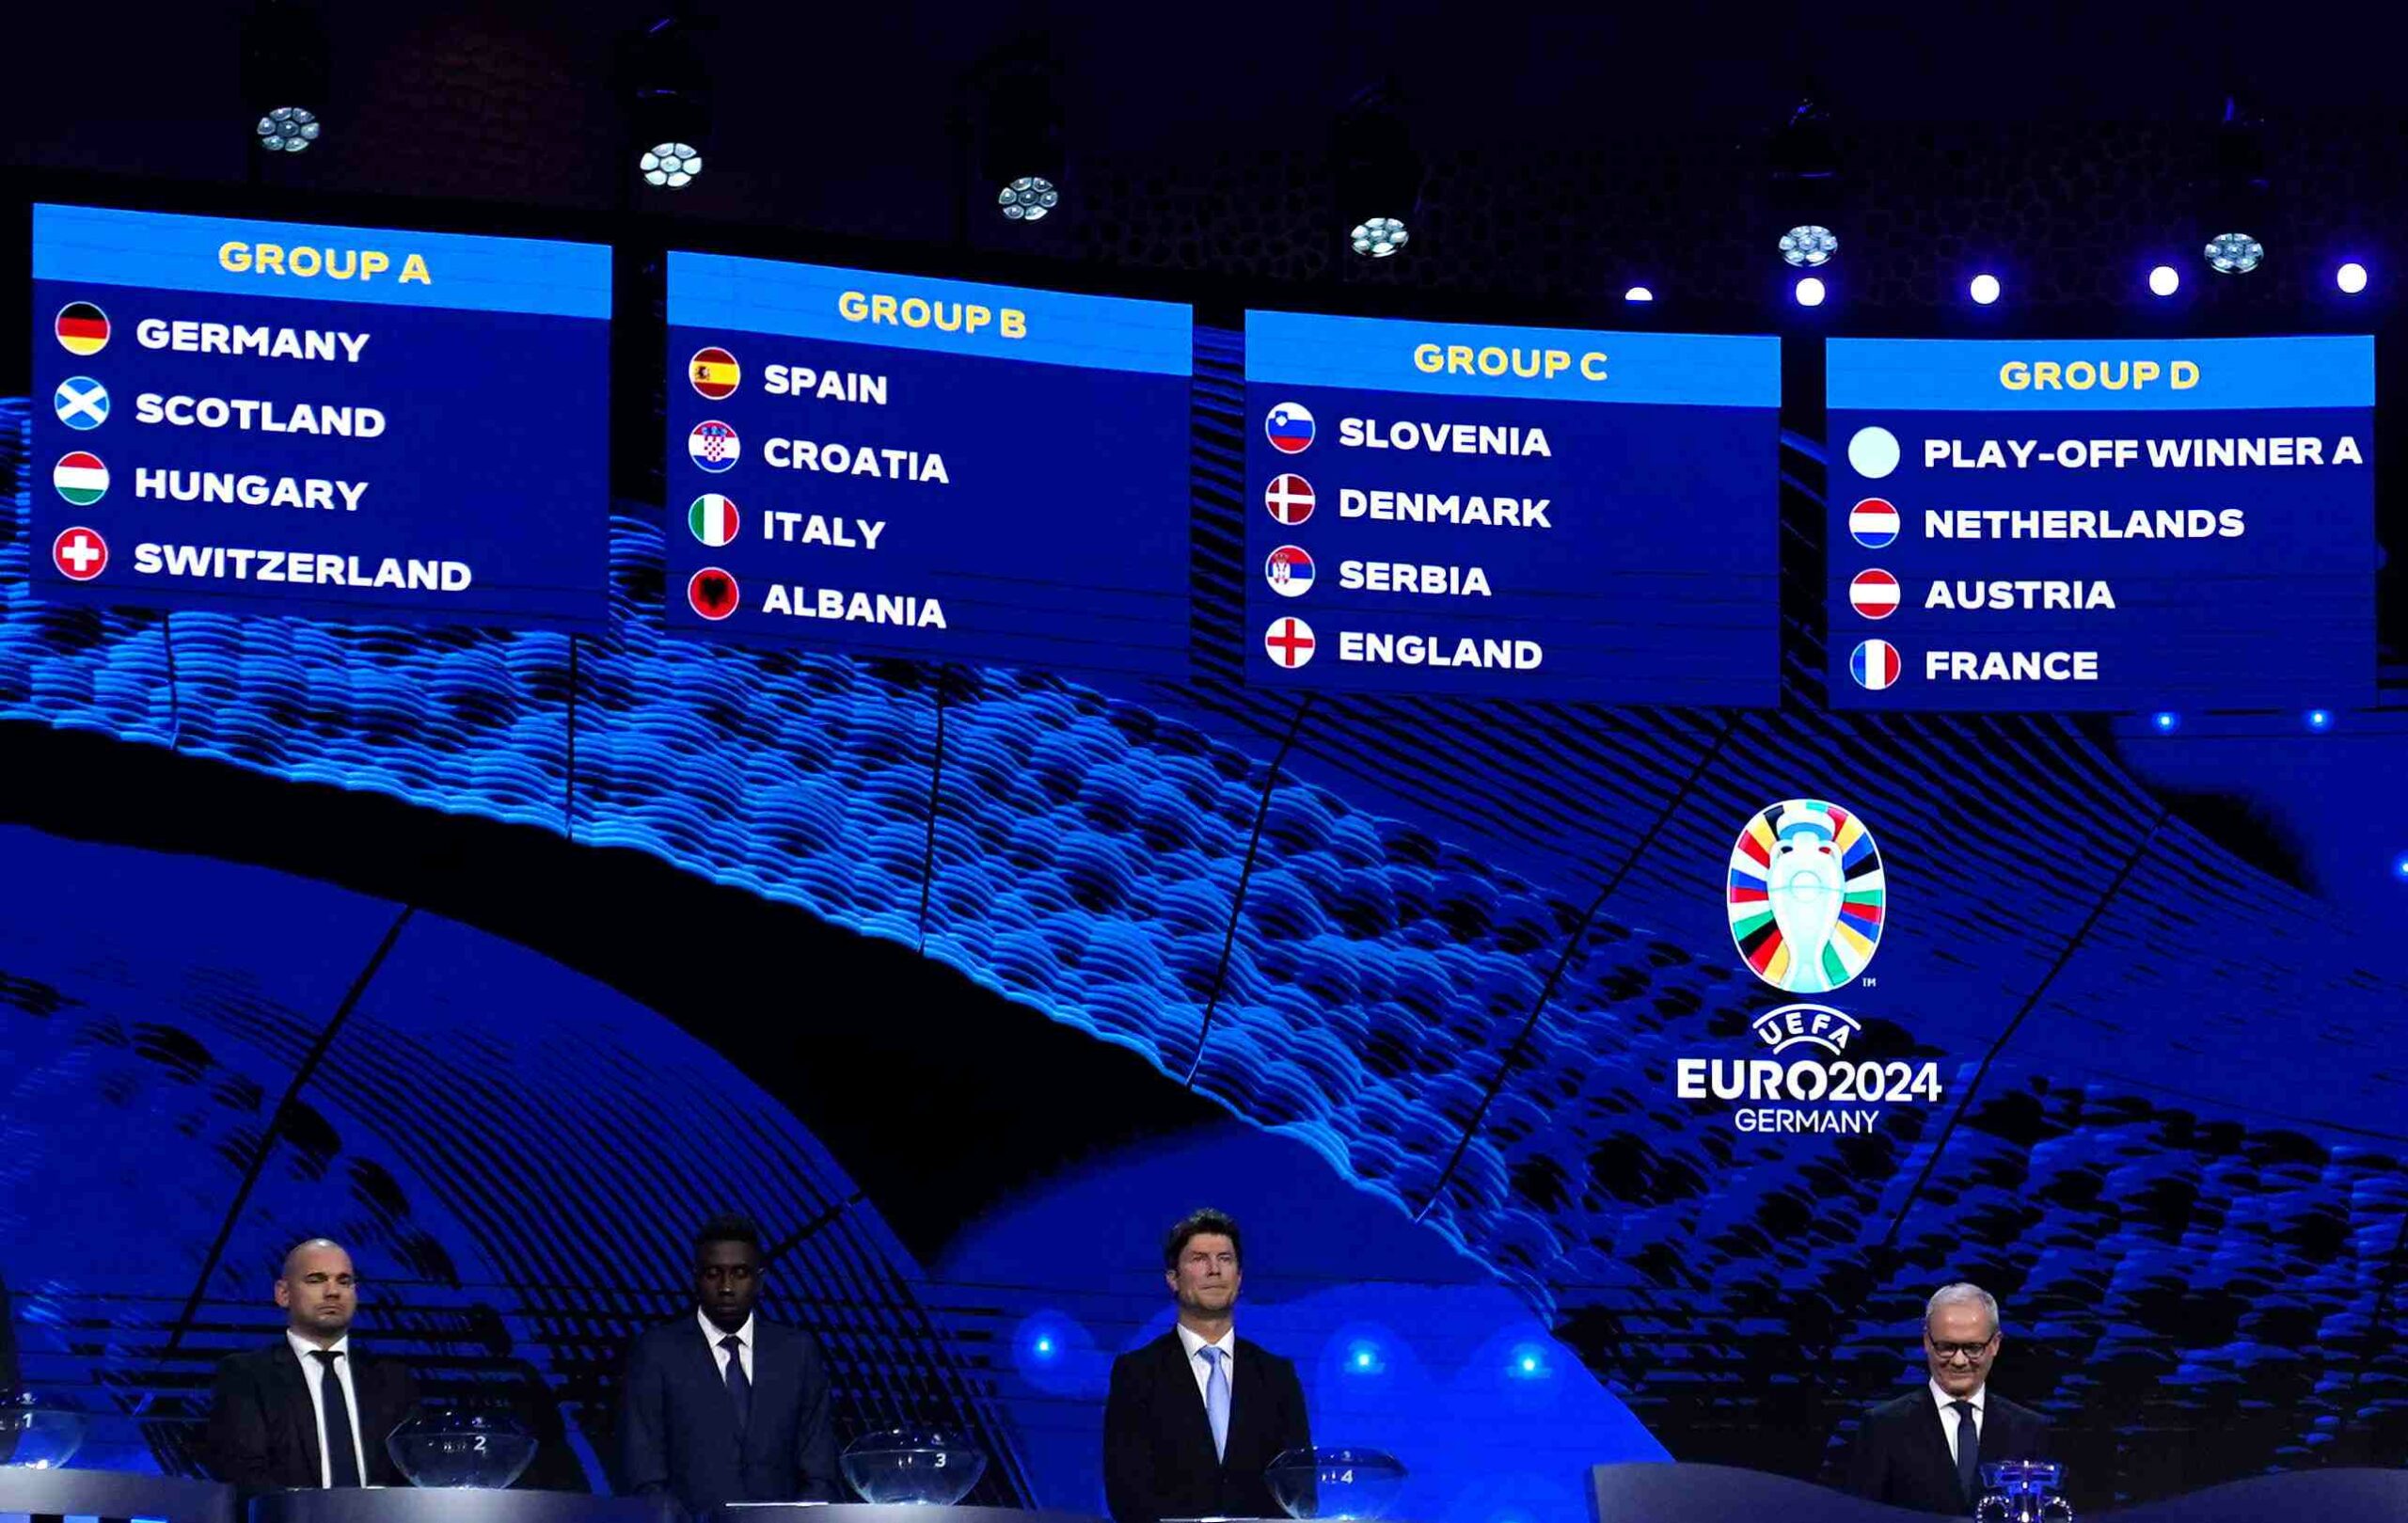 An image displaying the UEFA EURO 2024 qualification ceremony with a large screen showcasing the teams in Groups A, B, C, and D, as fans and officials watch eagerly.